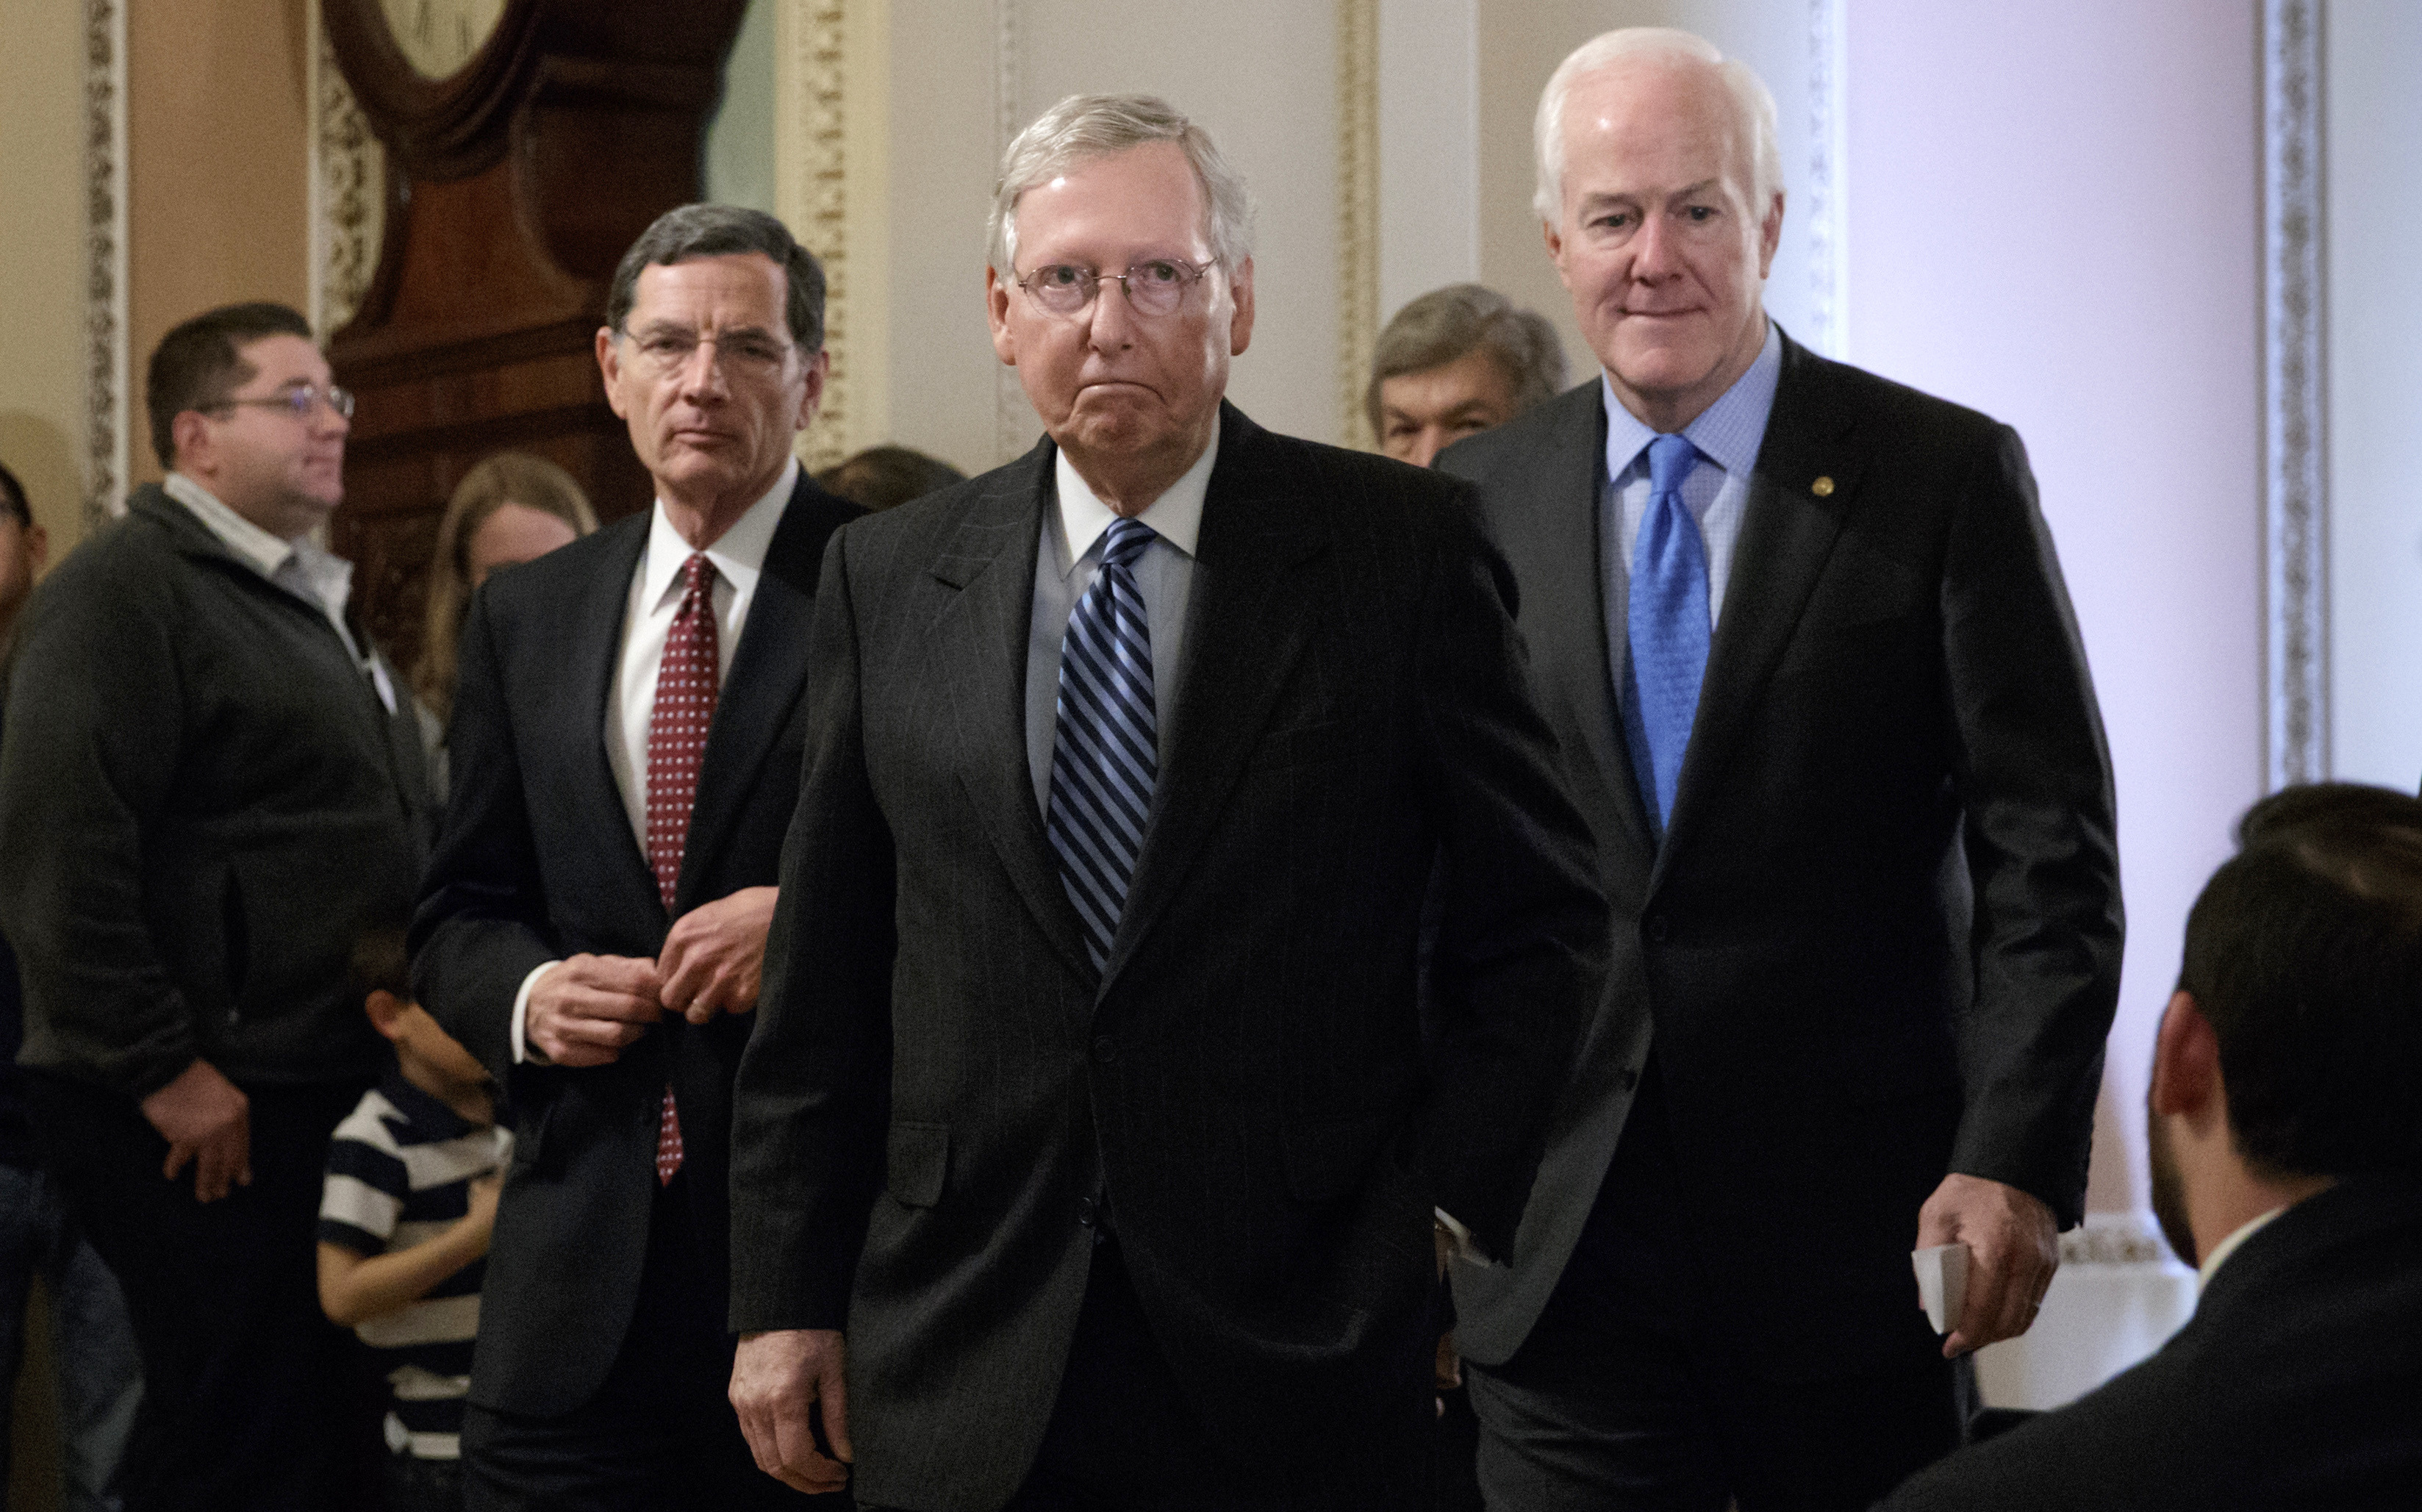 Senate Majority Leader Mitch McConnell, R-Ky., flanked by Sen. John Barrasso, R-Wyo., left, and Majority Whip John Cornyn, R-Texas, arrives to speak with reporters at the Capitol in Washington, Tuesday, March, 14, 2017. The White House and Republican leaders in Congress are scrambling to shore up support for their health care bill after findings from the Congressional Budget Office estimated that 14 million people would lose insurance coverage in the first year alone under the GOP replacement for Obamacare. (AP/J. Scott Applewhite)